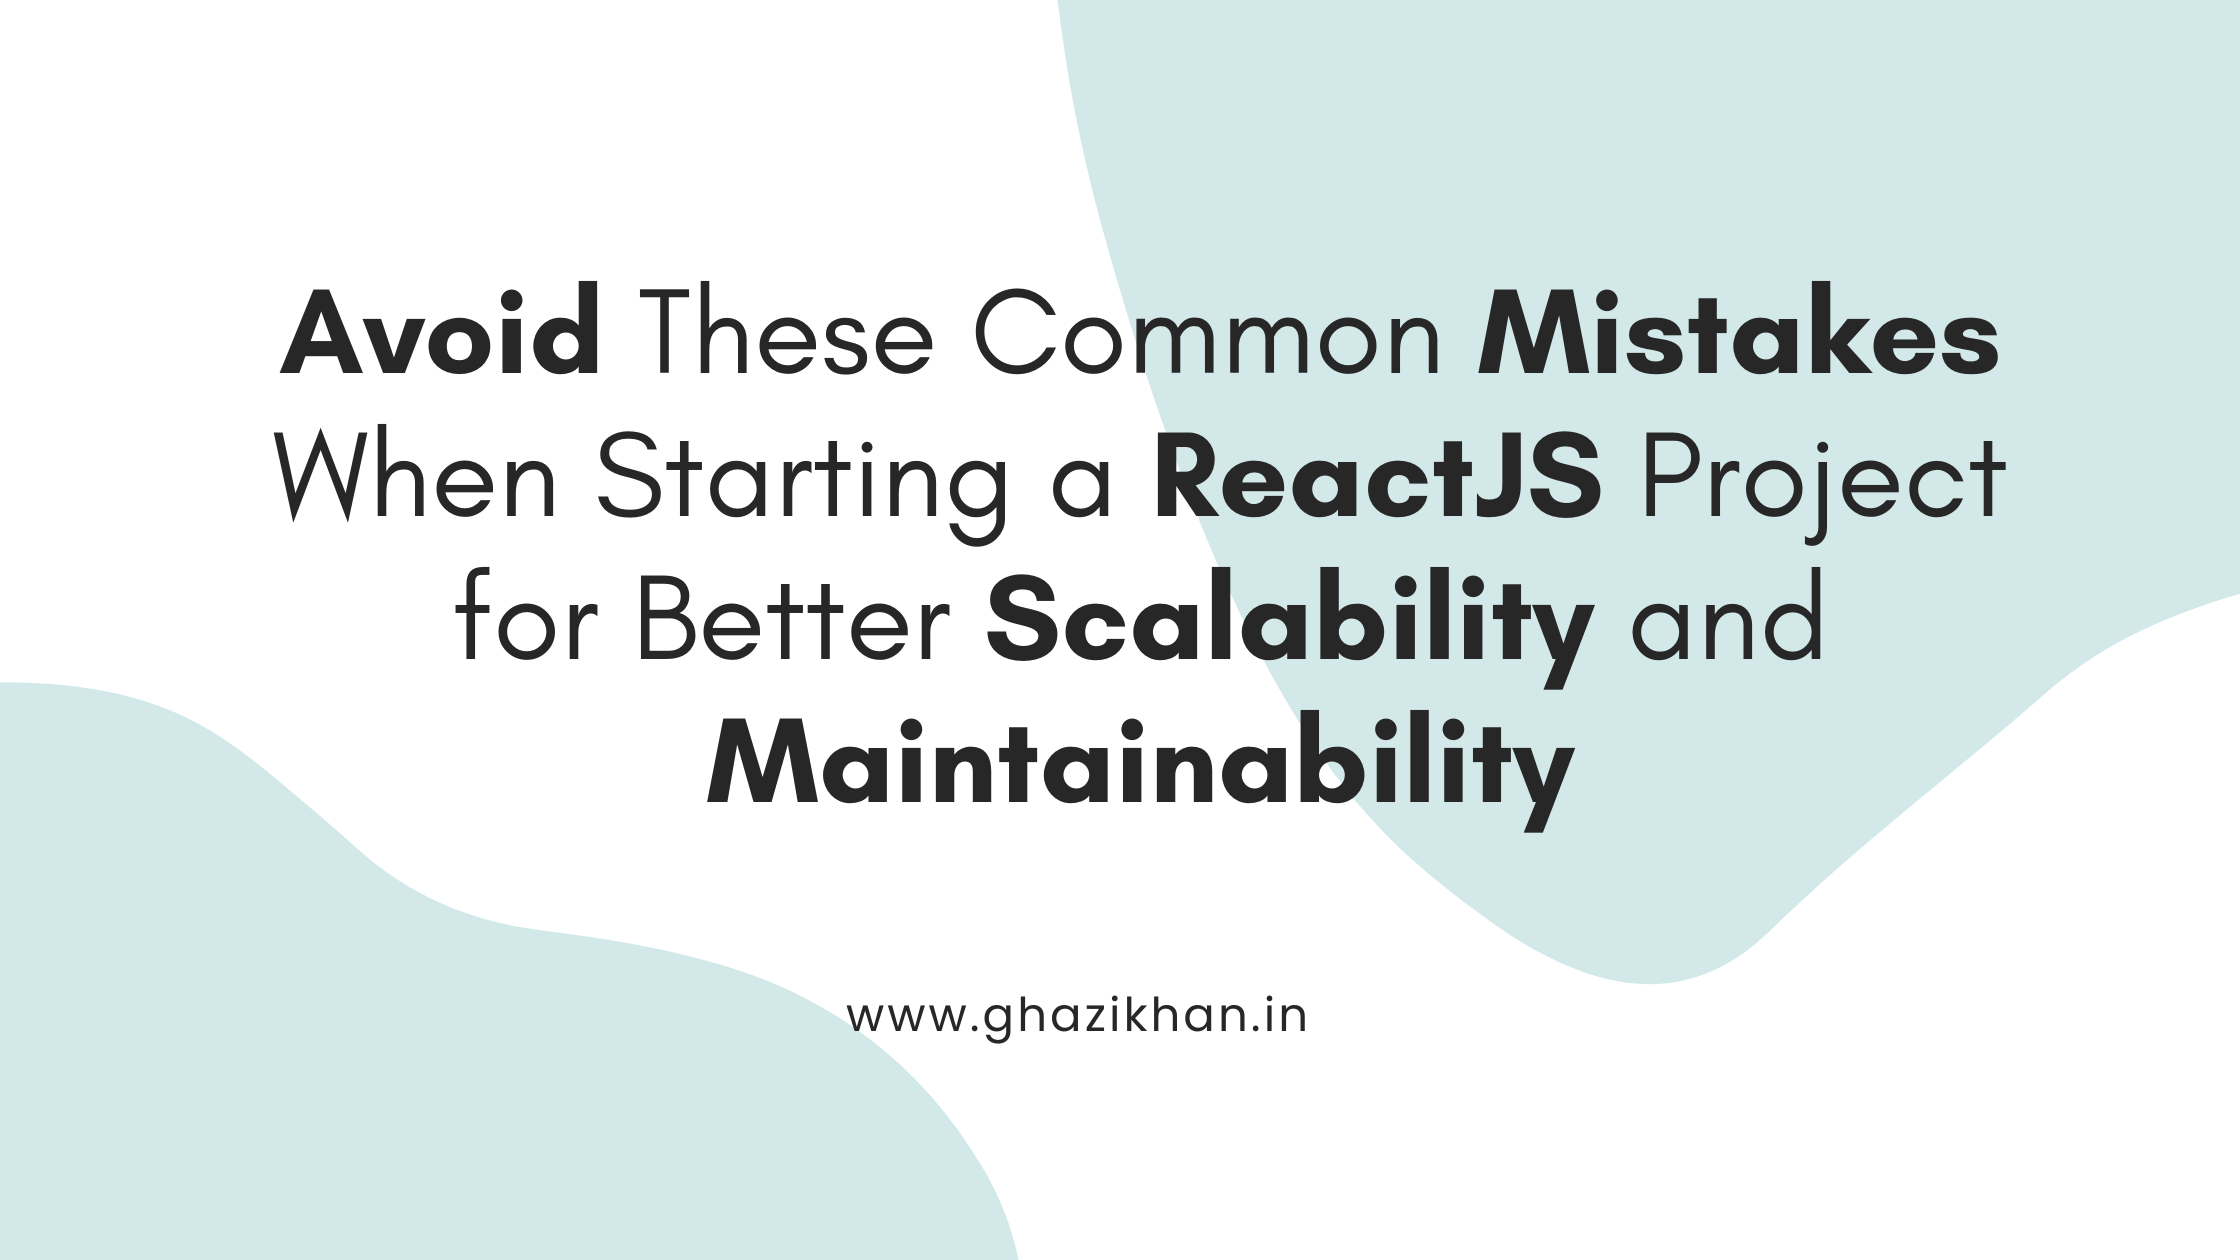 Avoid These Common Mistakes When Starting a ReactJS Project for Better Scalability and Maintainability